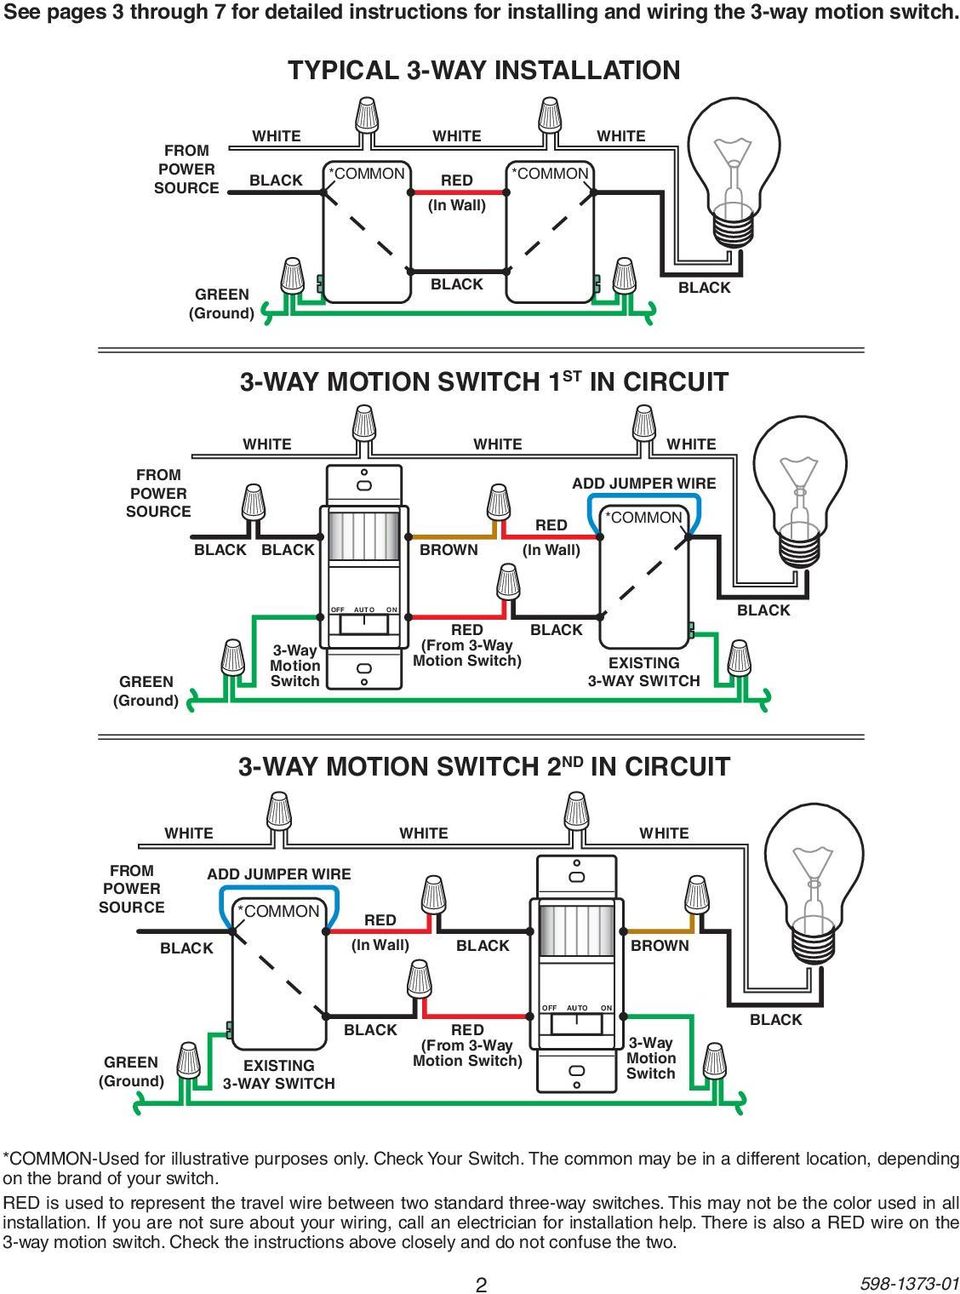 BROWN (In Wall) GREEN (Ground) 3-Way Motion Switch RED (From 3-Way Motion Switch) EXISTING 3-WAY SWITCH 3-WAY MOTI SWITCH 2 ND IN CIRCUIT WHITE WHITE WHITE FROM POWER SOURCE ADD JUMPER WIRE *COMM RED